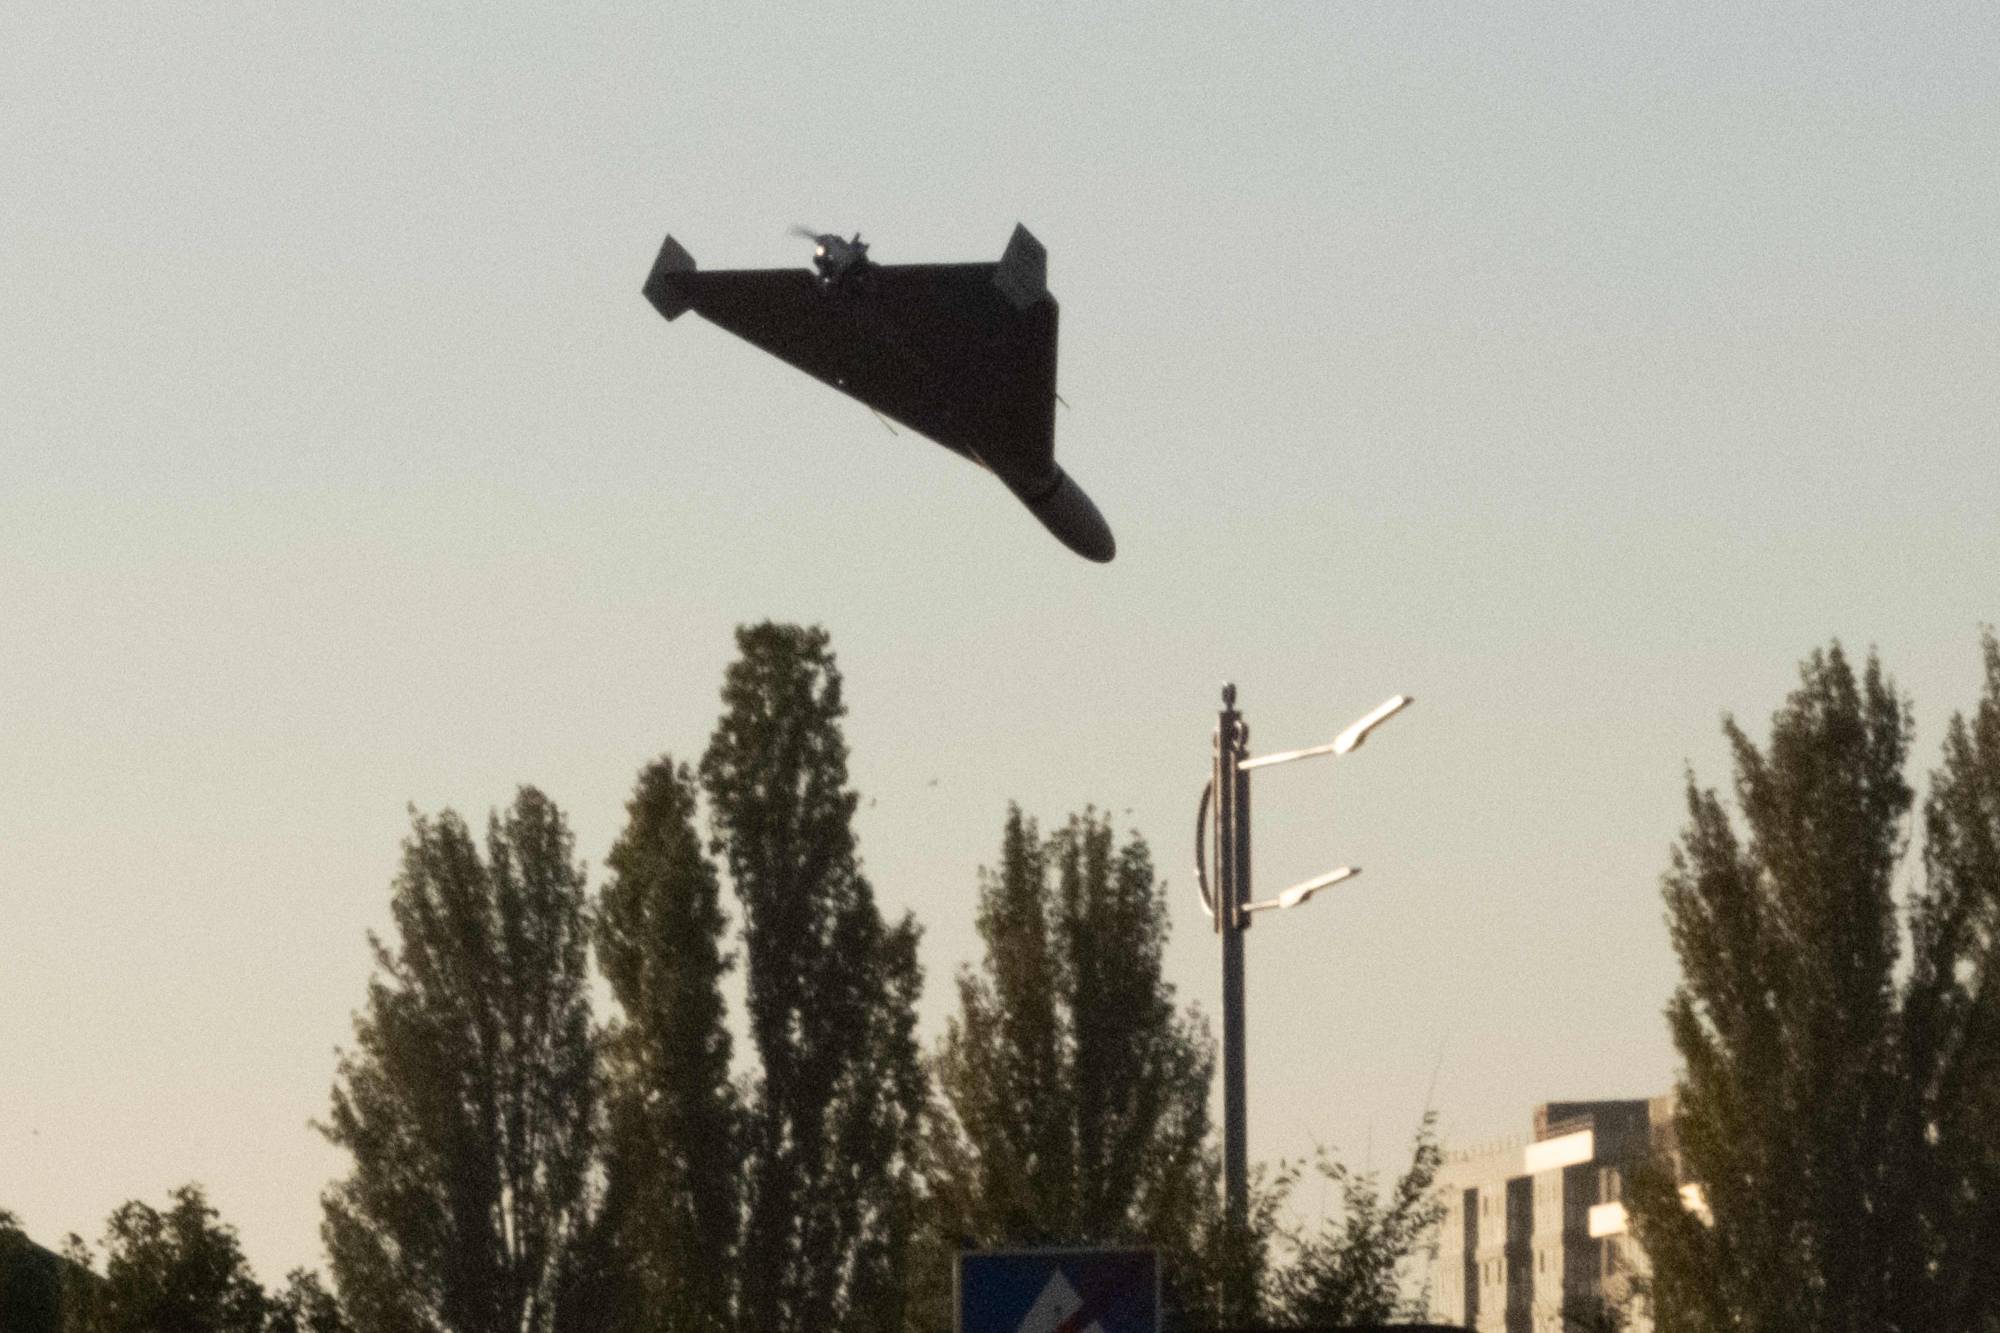 A drone approaches for an attack in Kyiv